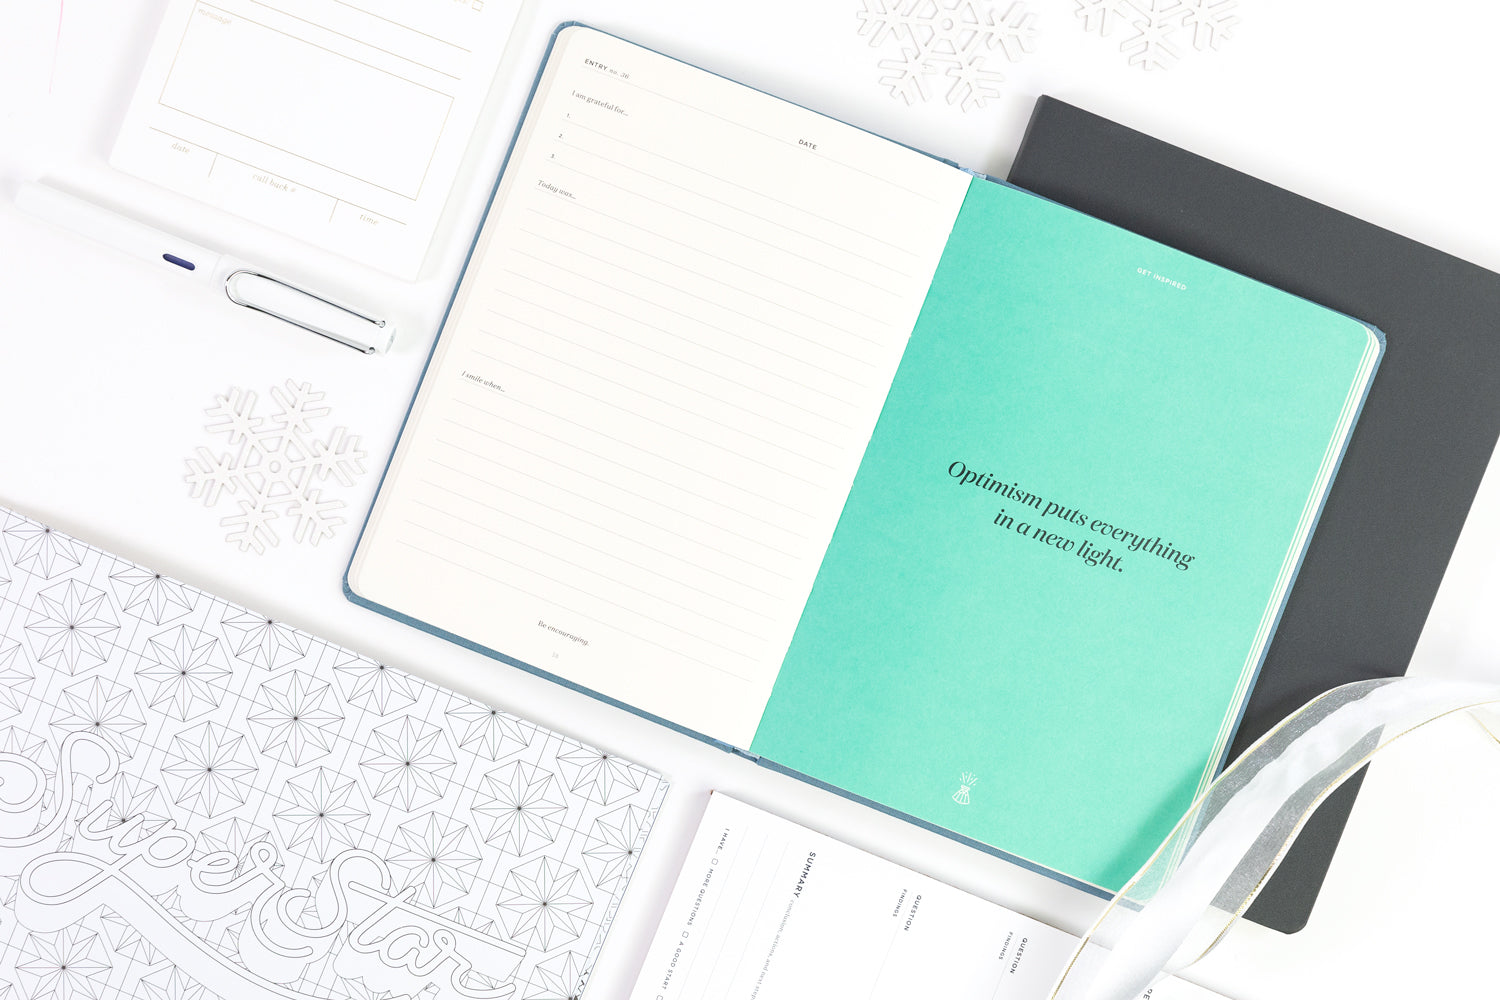 Creative gifts on a white background: a gratitude journal, executive notebook, and a coloring book.